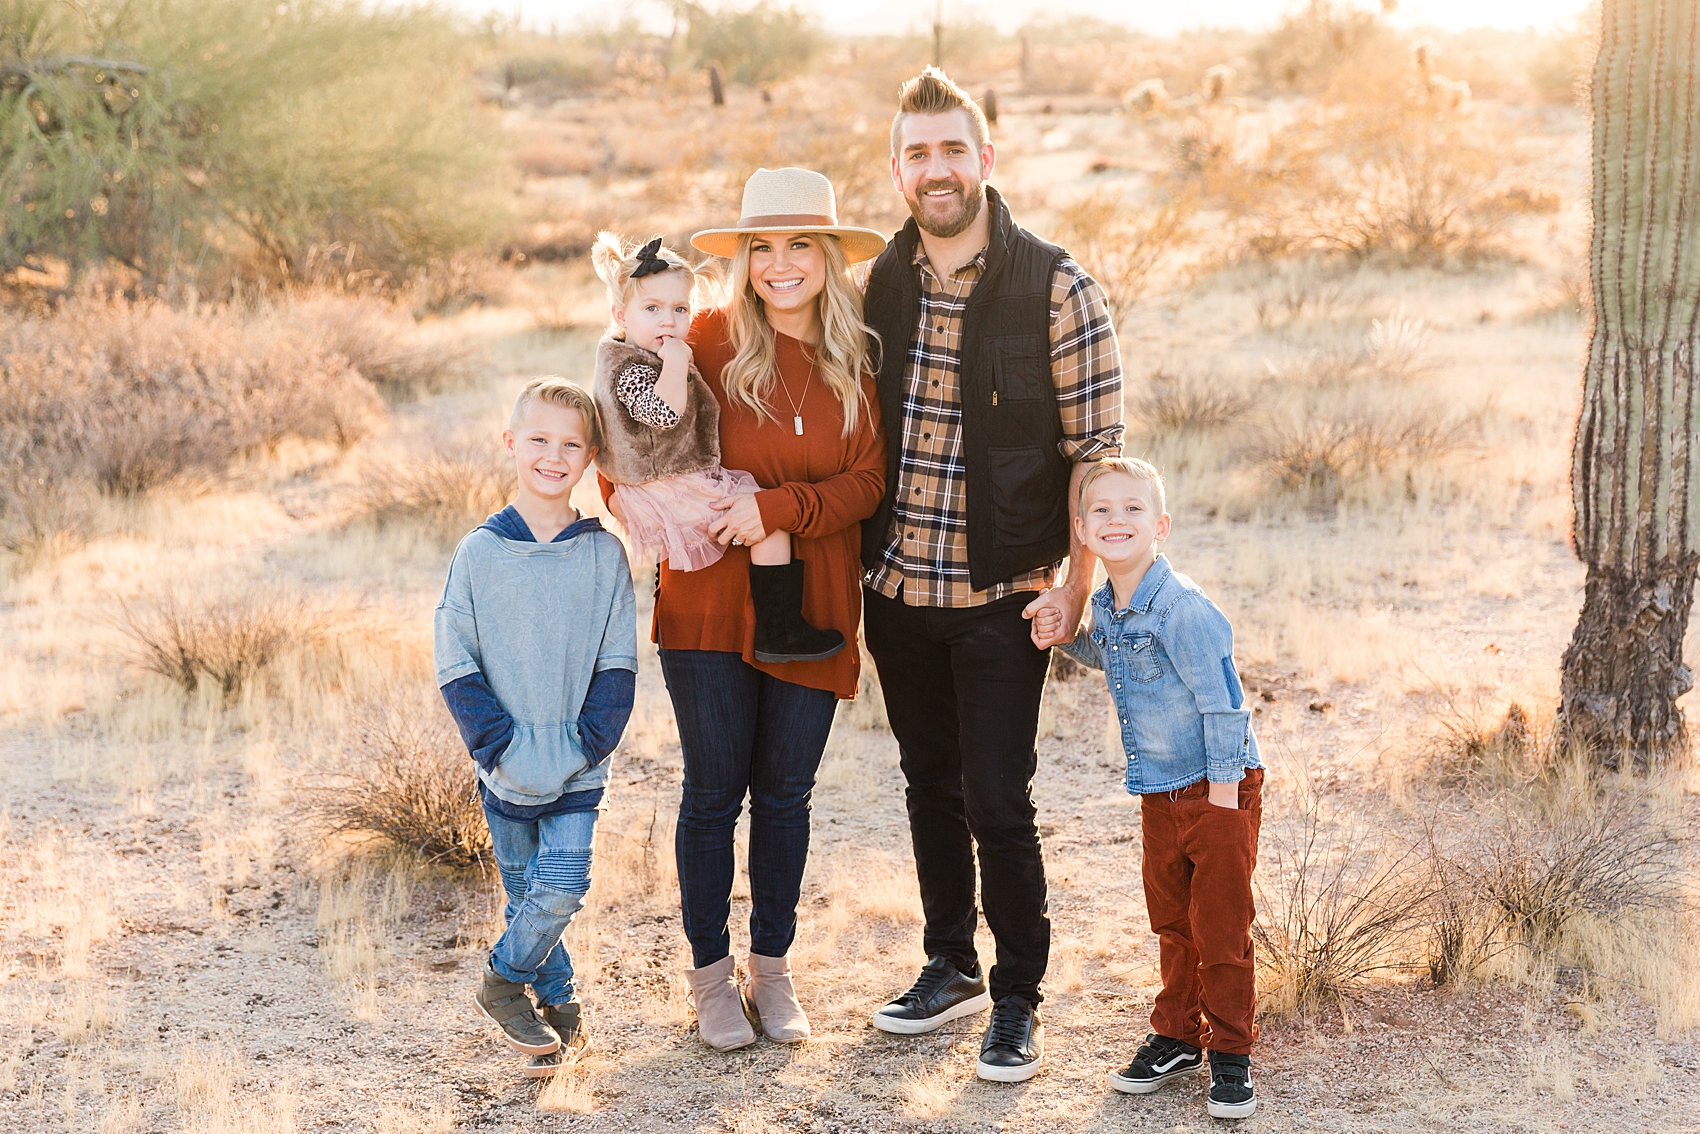 Leah Hope Photography | Scottsdale Phoenix Arizona | Desert Landscape Cactus Scenery | Sunset Golden Hour Family Photos | Family Pictures | What to Wear | Family Poses | Coordinating Outfits